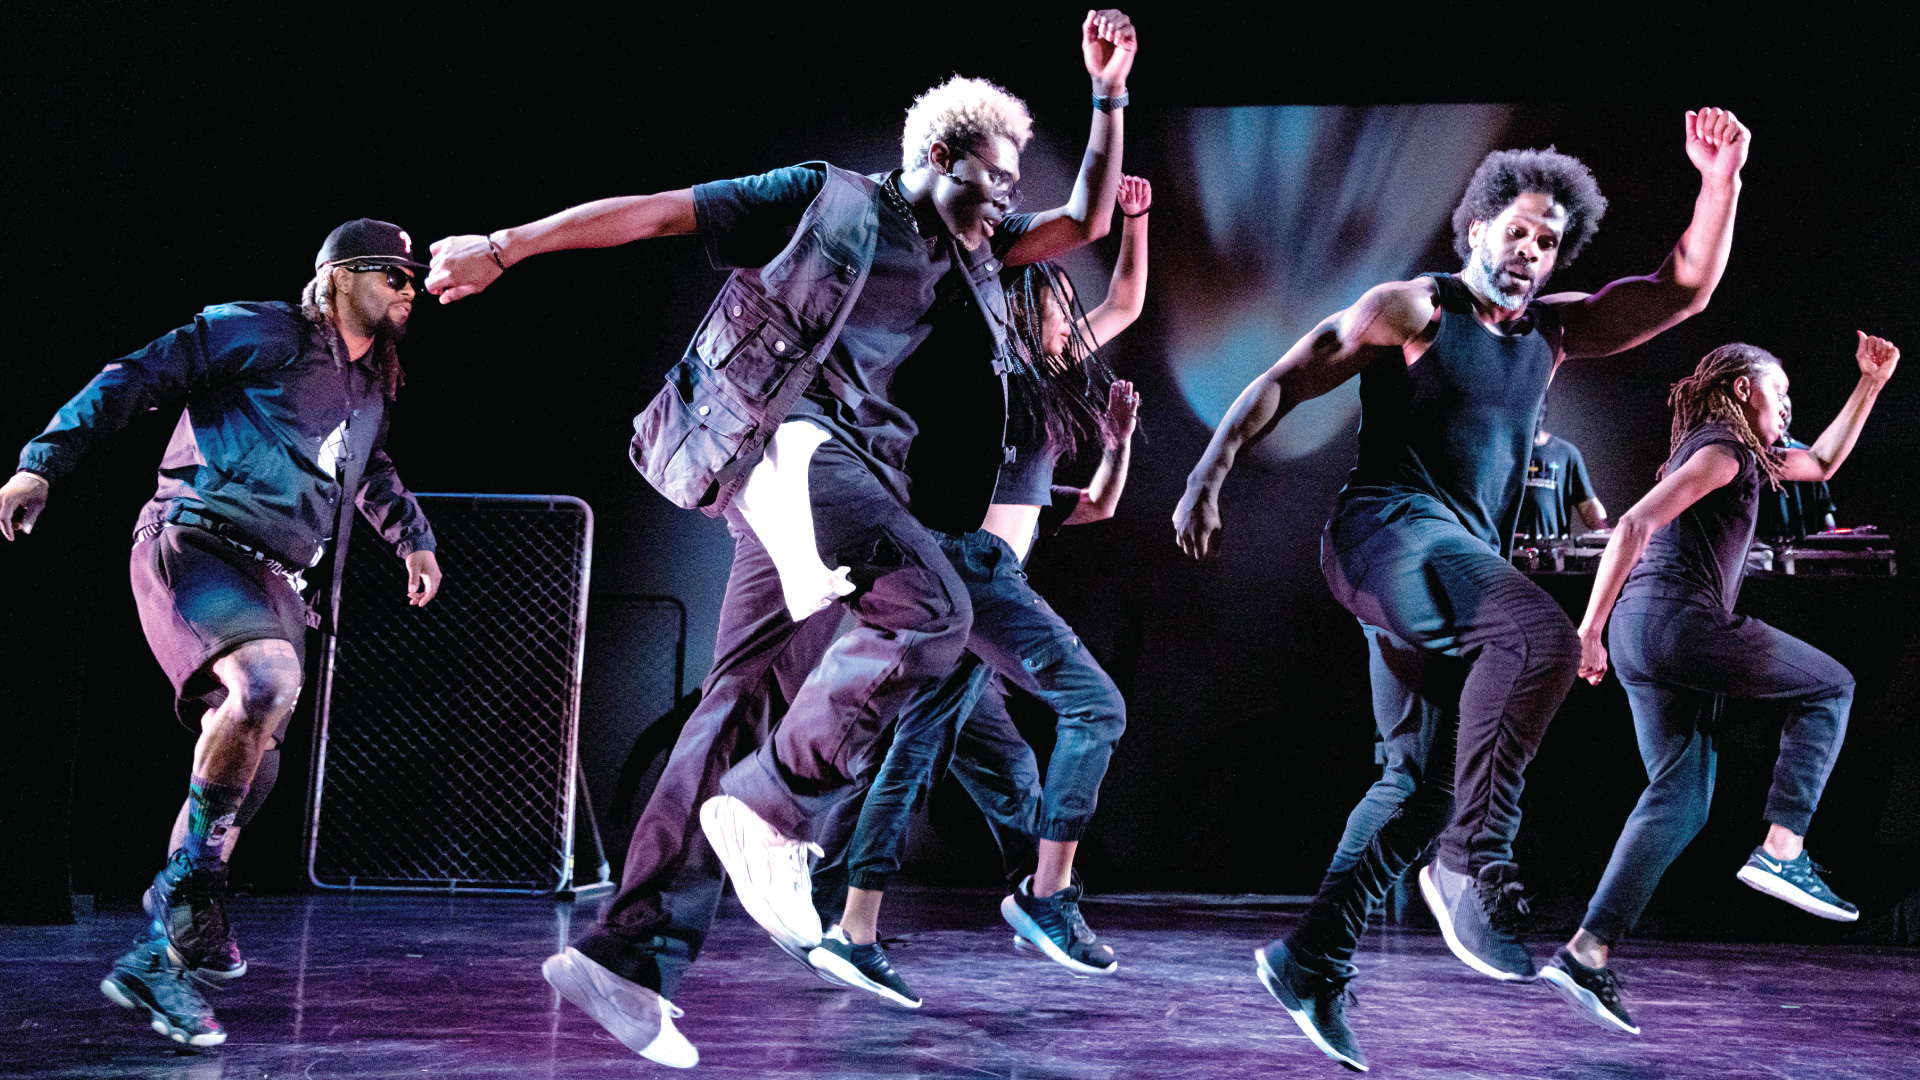 Five black dancers wearing black clothes are in the middle of an energetic step with their arms in the air while someone controls a sound system behind them.